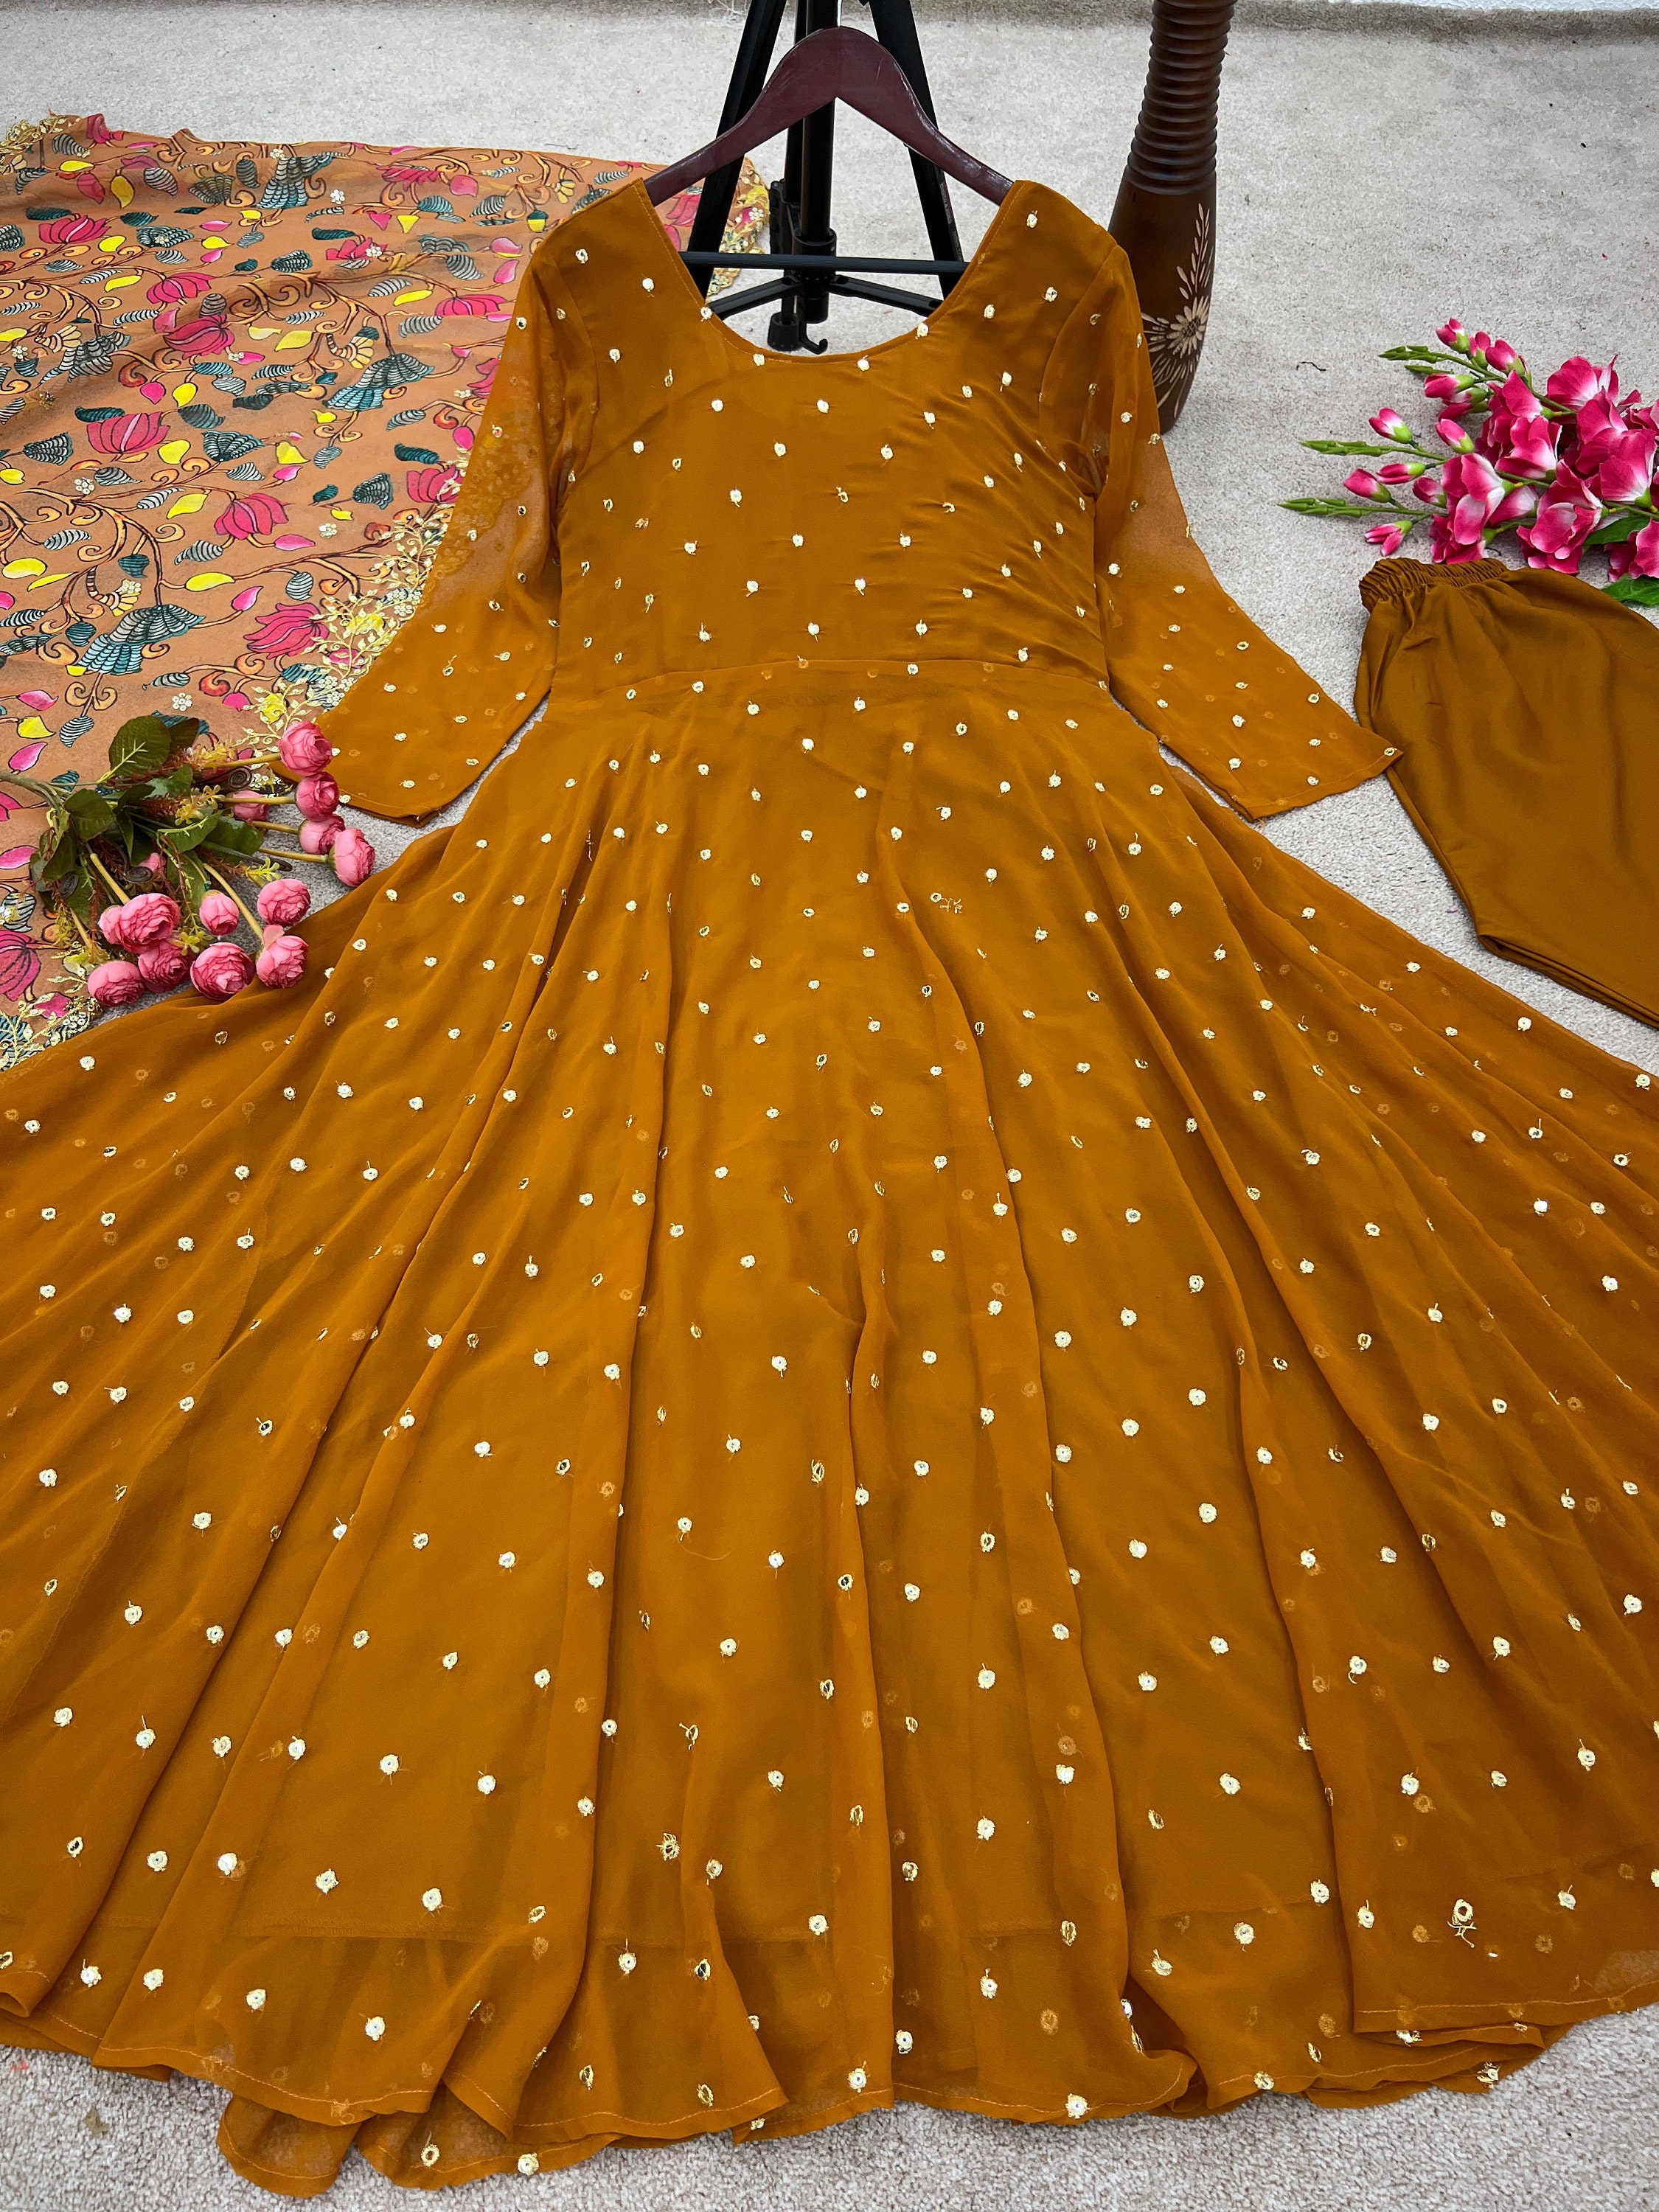 Georgette Casual Gown in Beige and Brown with Bugle Beads work | Indian  party wear dresses, Party wear dresses, Casual gowns